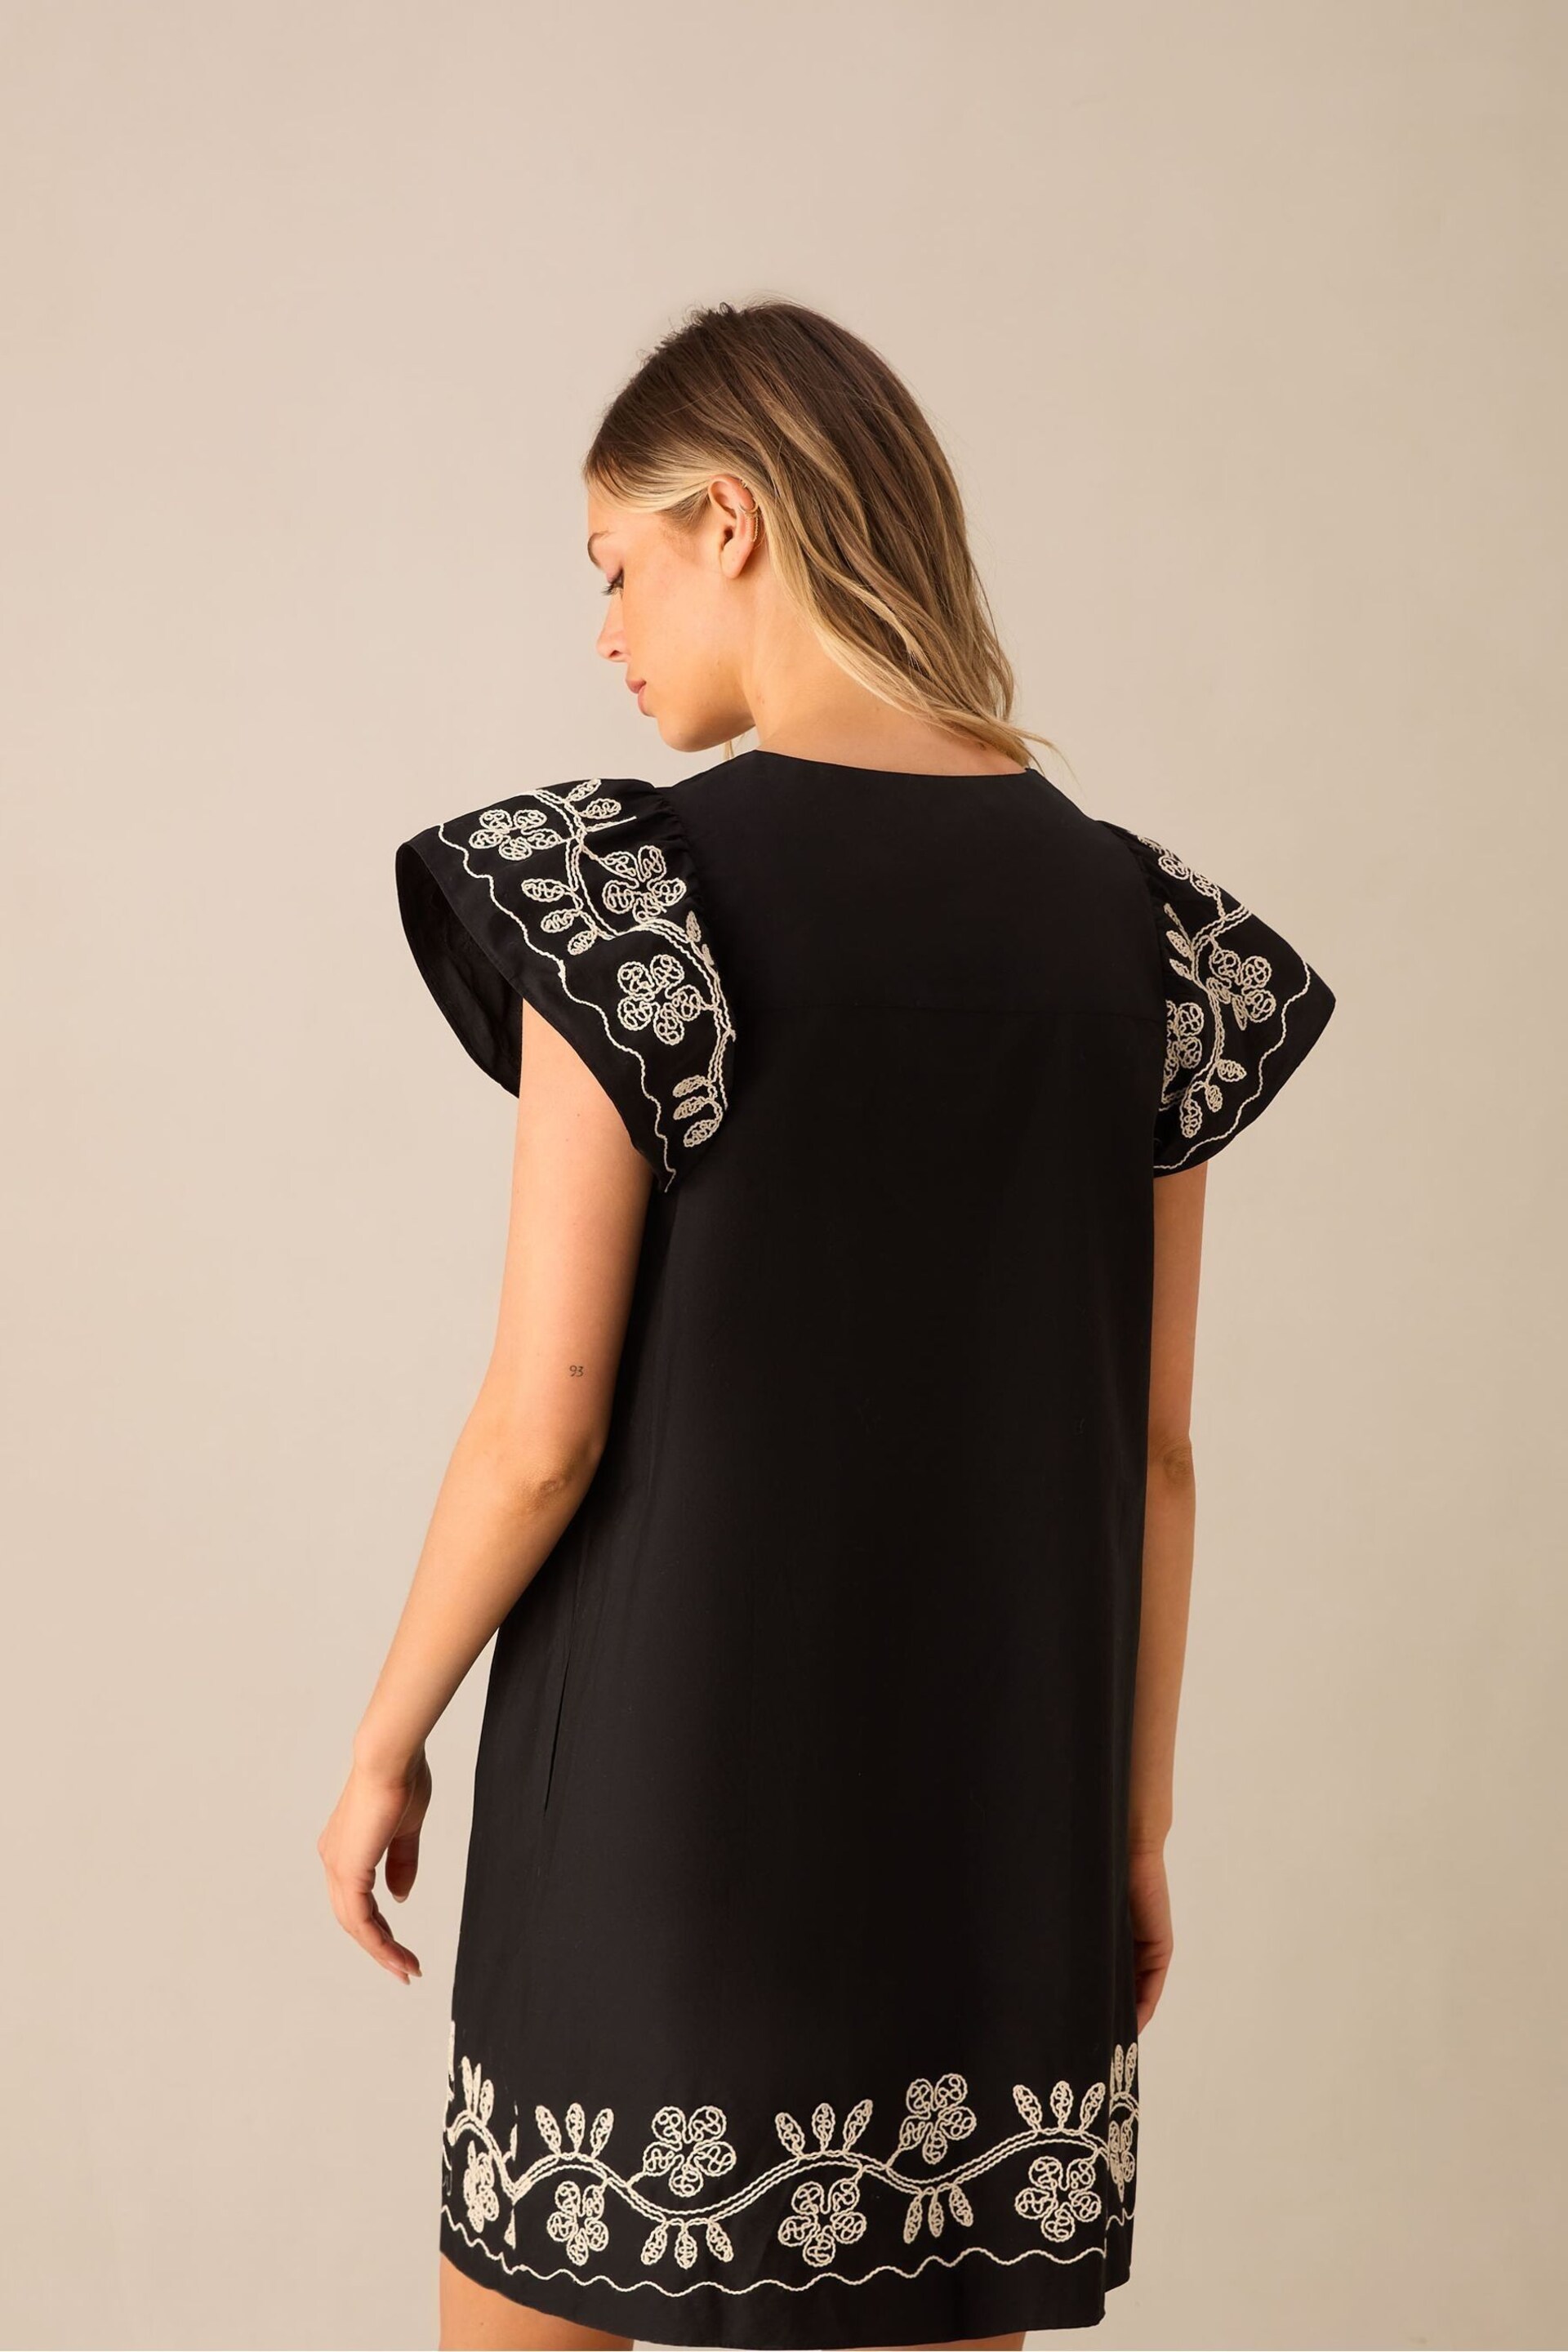 Ro&Zo Embroidery Frill Short Black Dress - Image 2 of 8